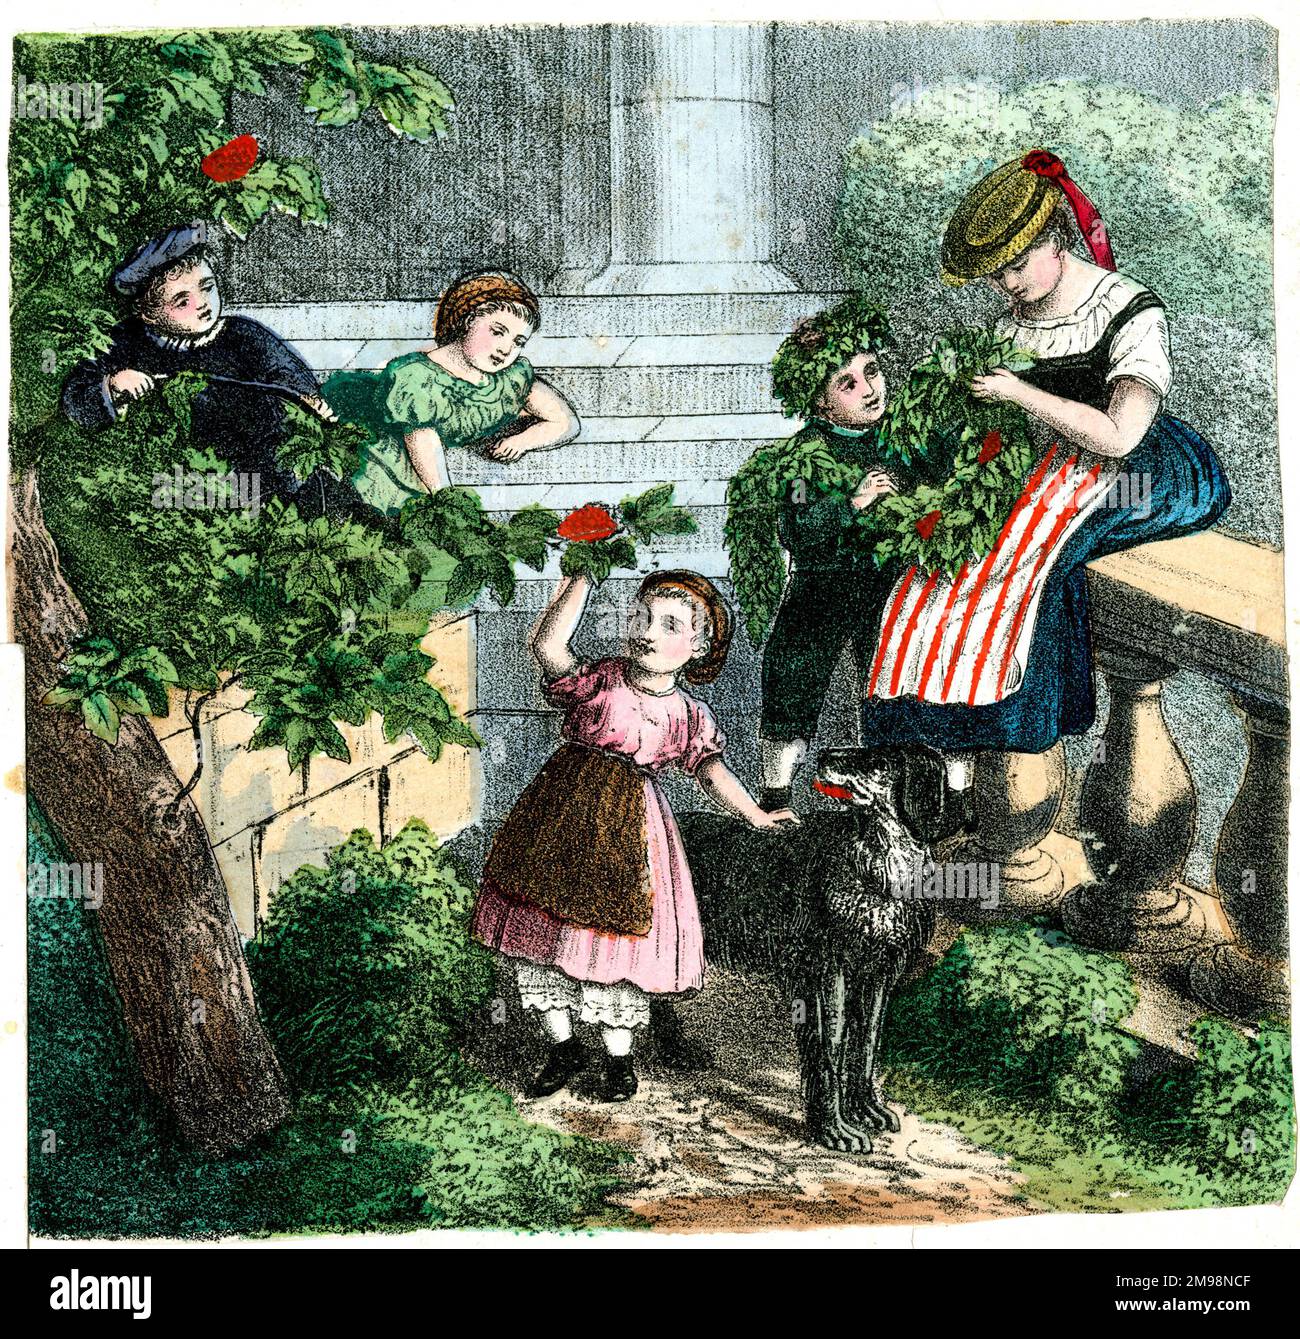 German print - Four Seasons, children in a garden in the spring. Stock Photo